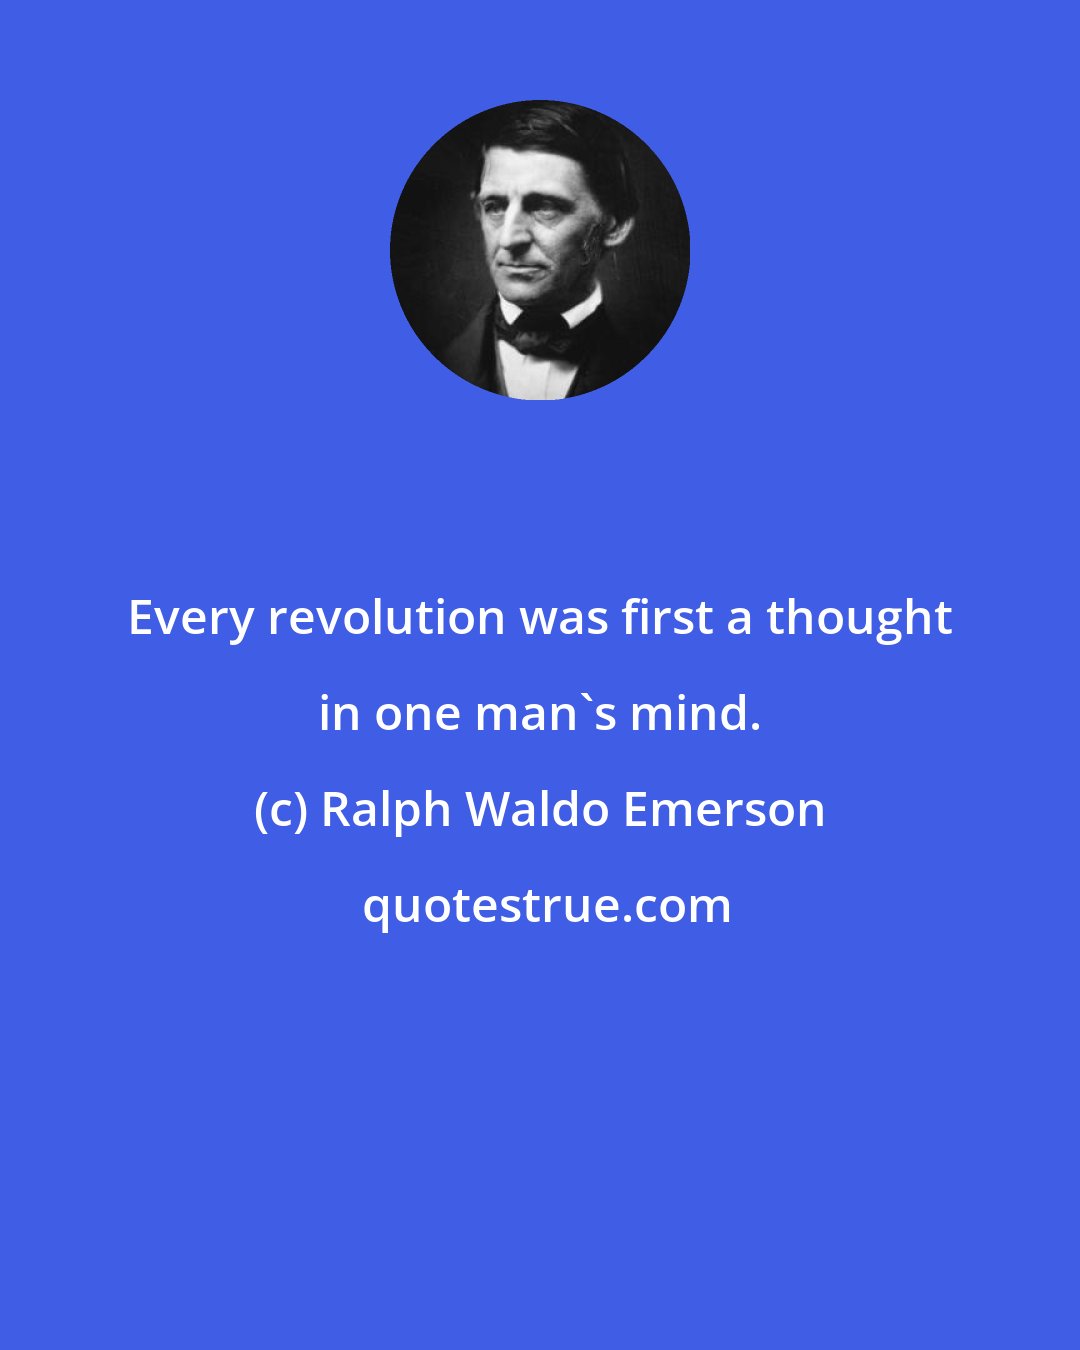 Ralph Waldo Emerson: Every revolution was first a thought in one man's mind.